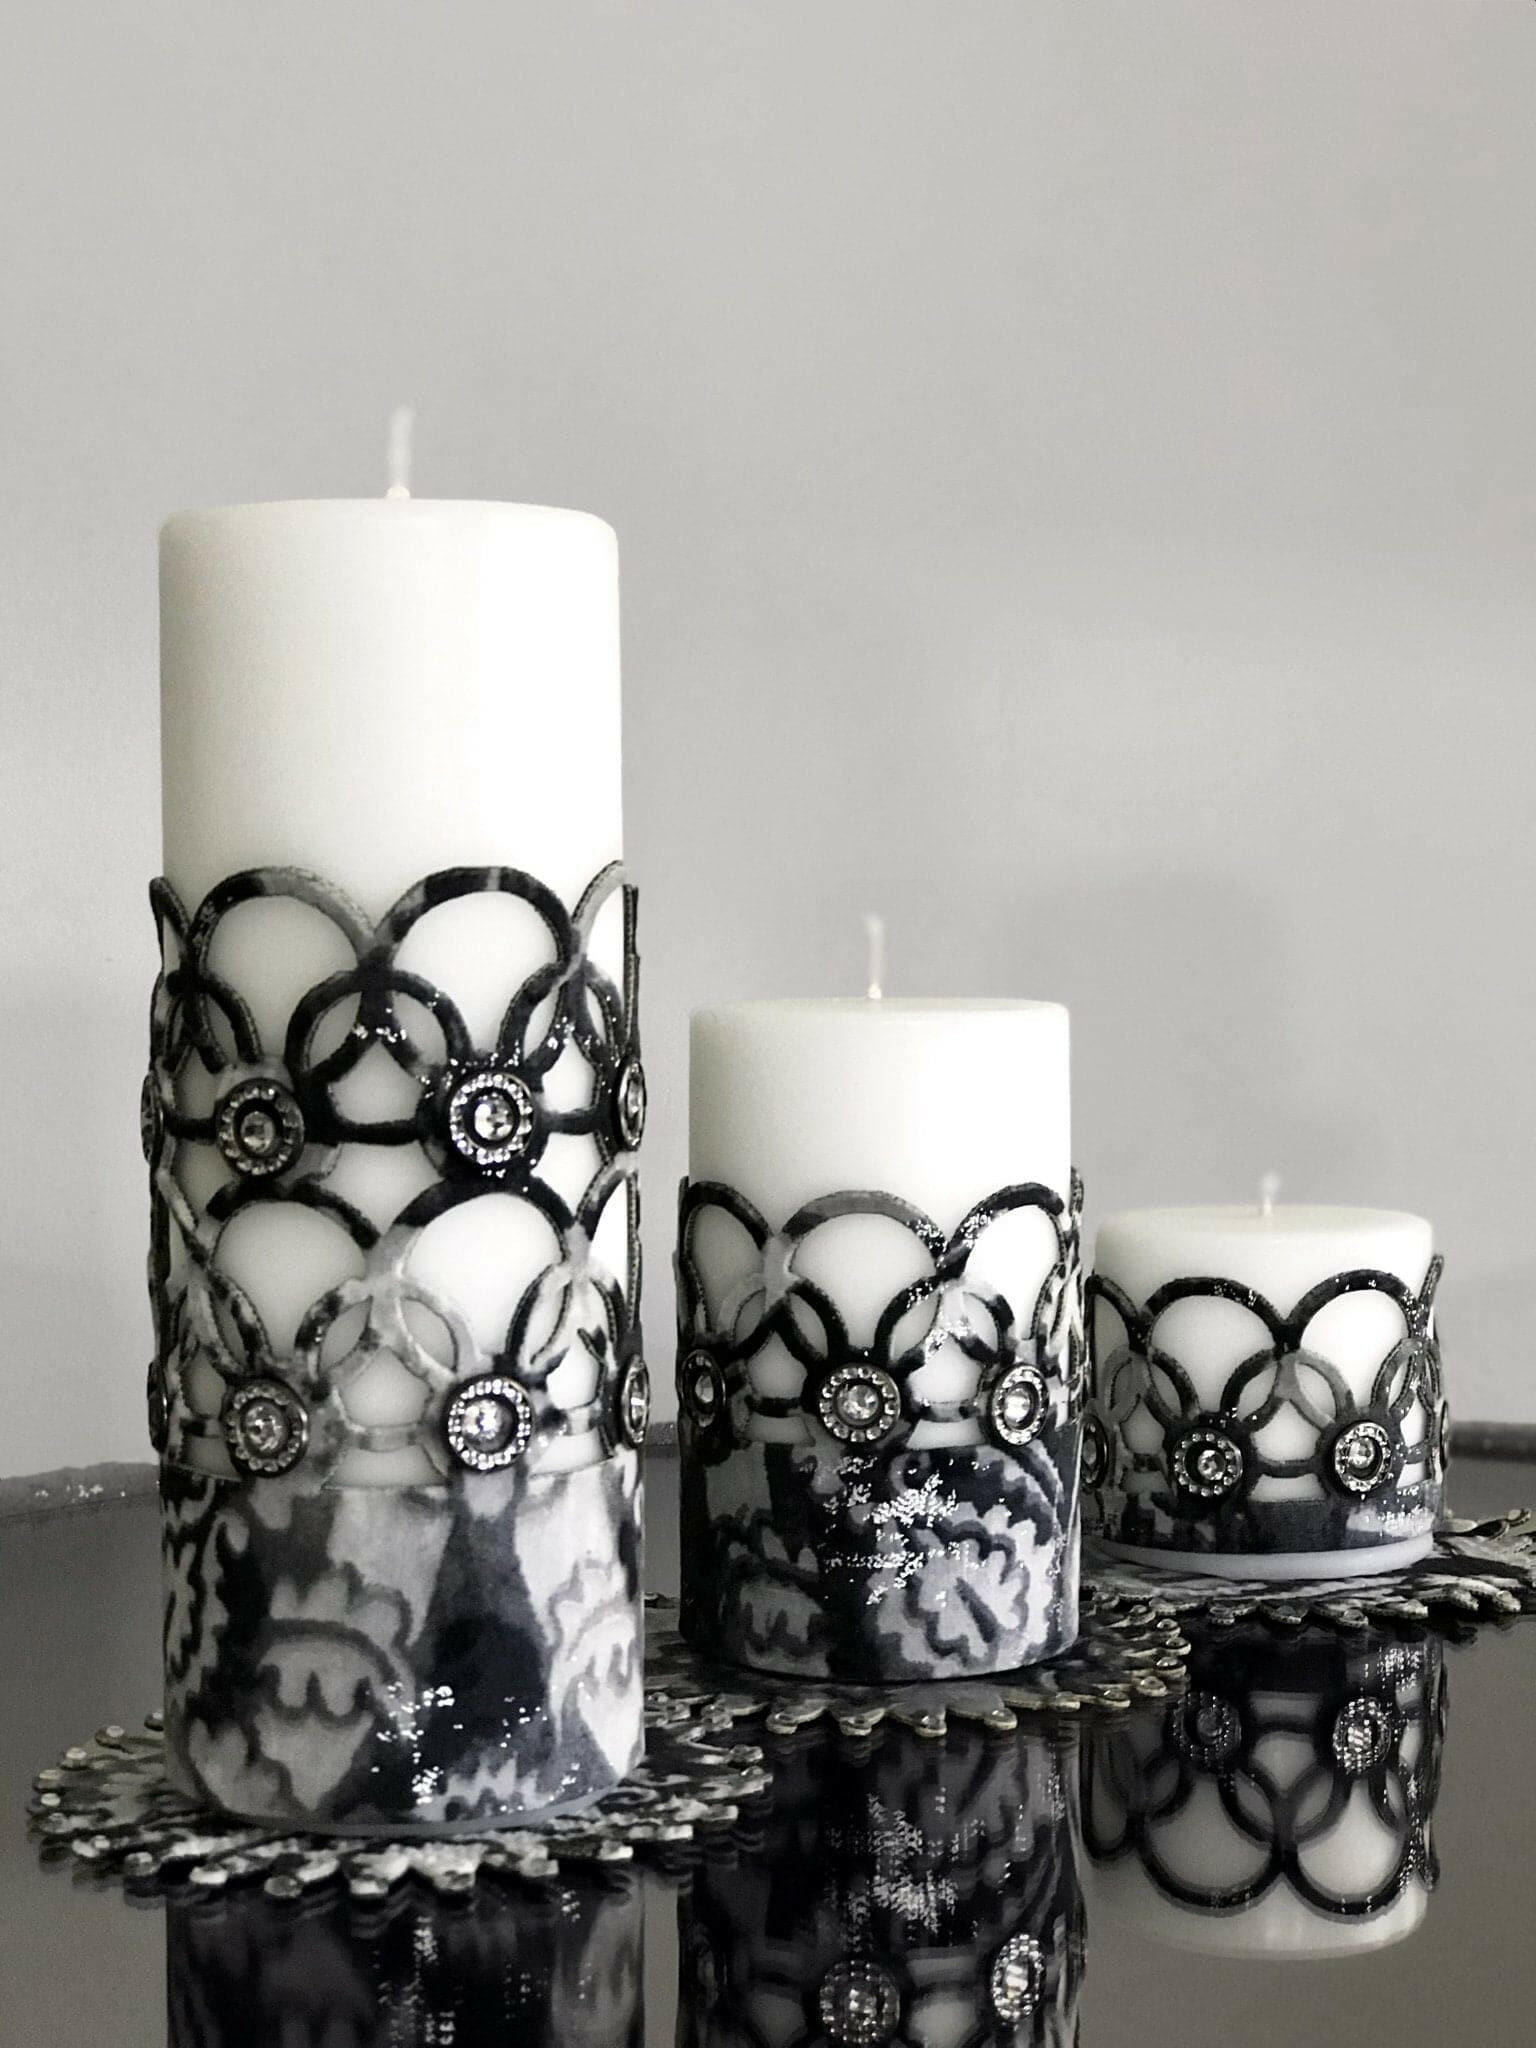 Zerre Anthracite Grey Luxury Candle Set of 3, Leather Circular Pattern, Decorative Glamorous Candles by Creative Home